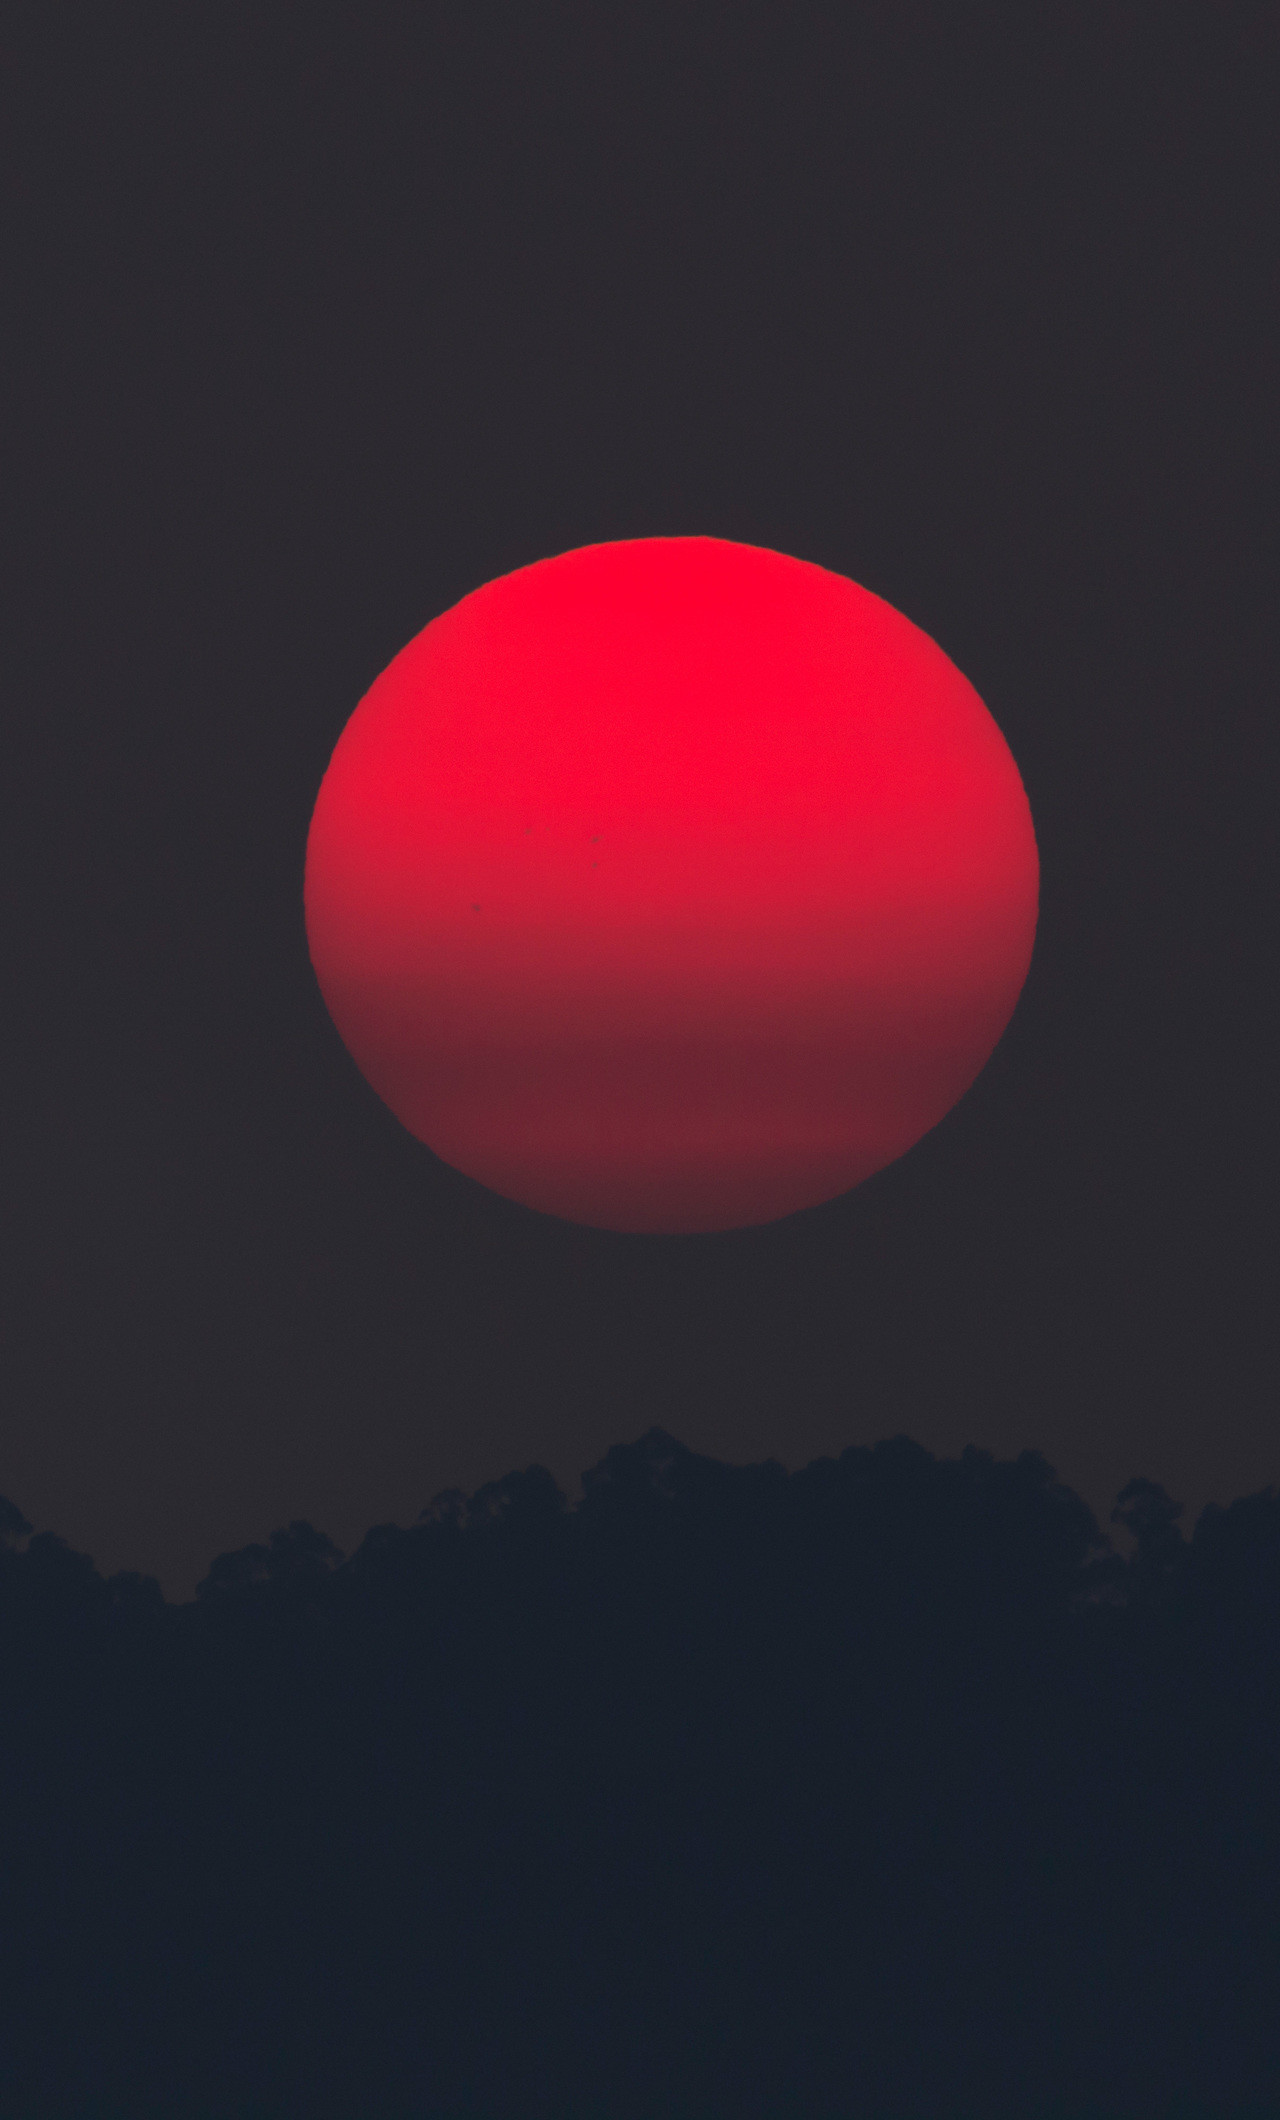 1280x2120 Red Moon At Evening (iPhone 6+)